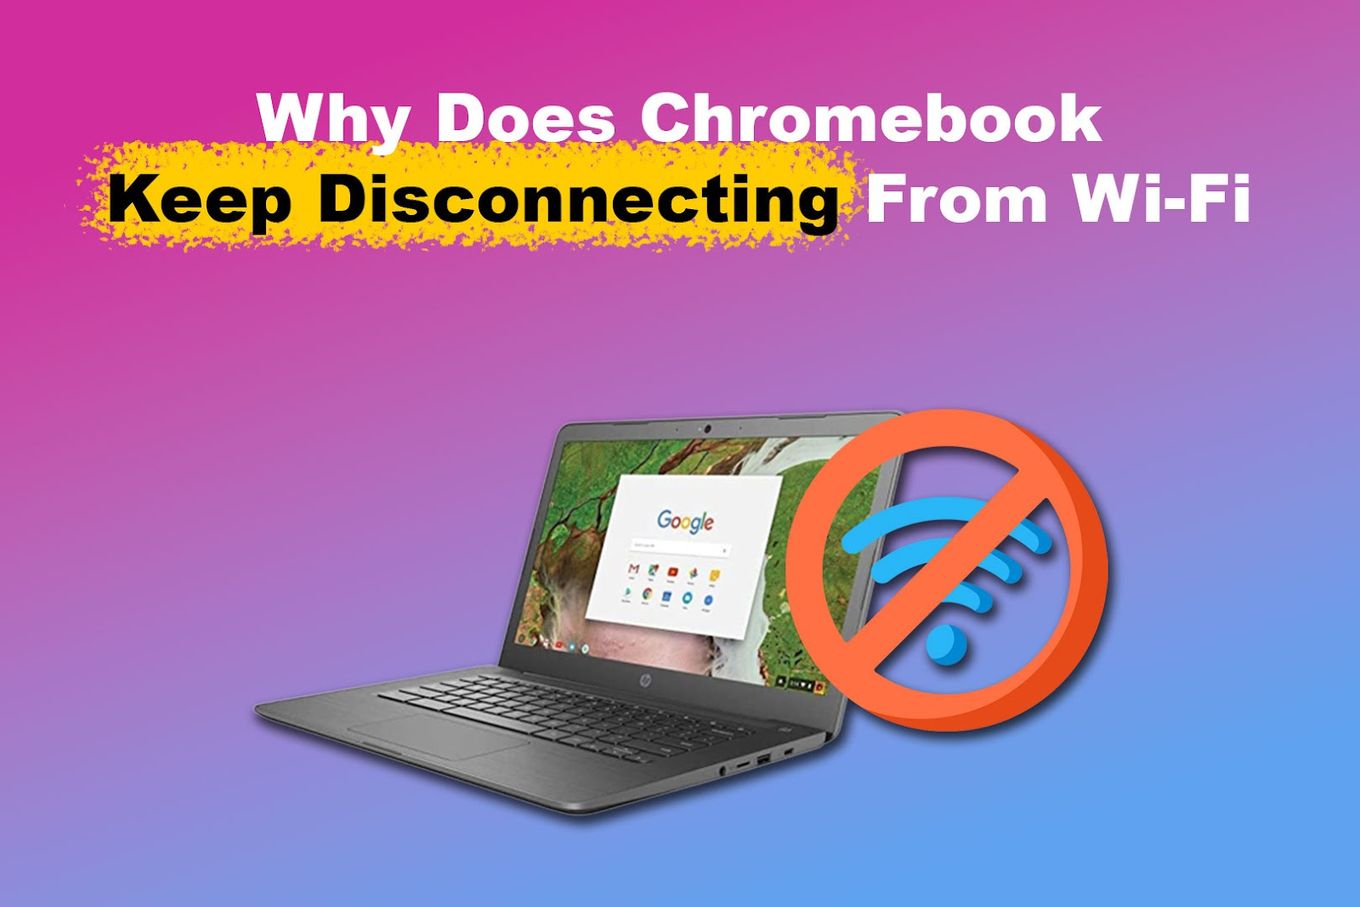 Why Does Chromebook Keep Disconnecting From Wi-Fi